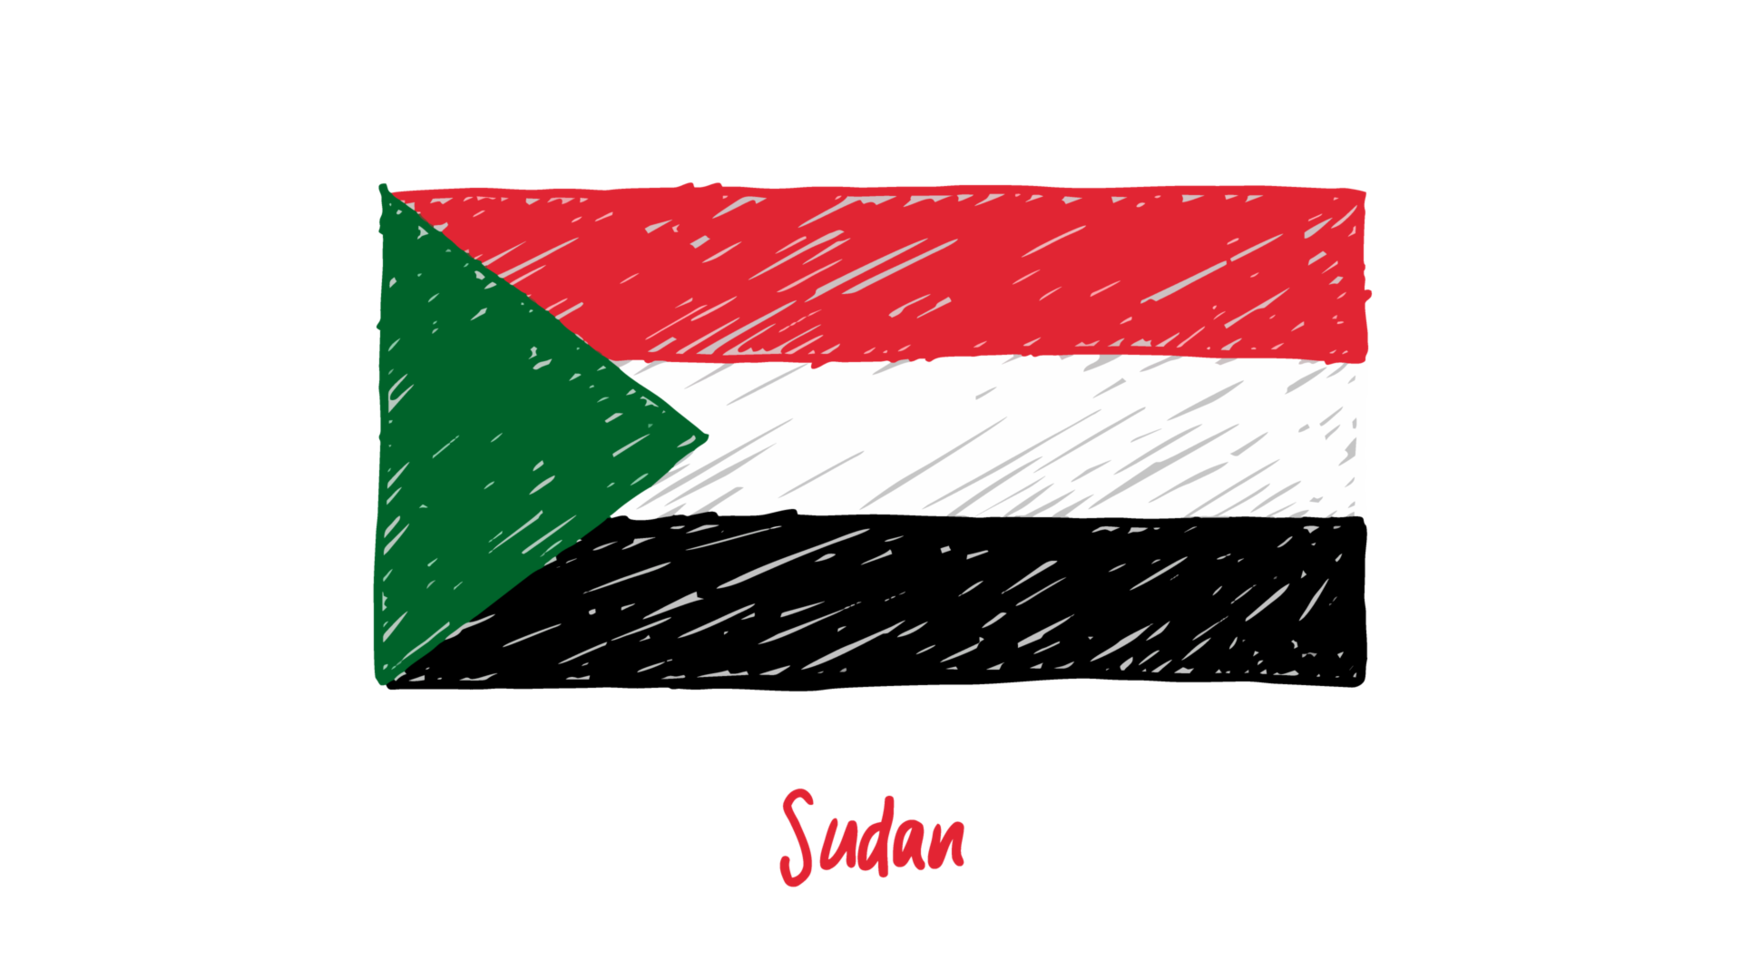 Sudan National Country Flag Pencil Color Sketch Illustration with Transparent Background png